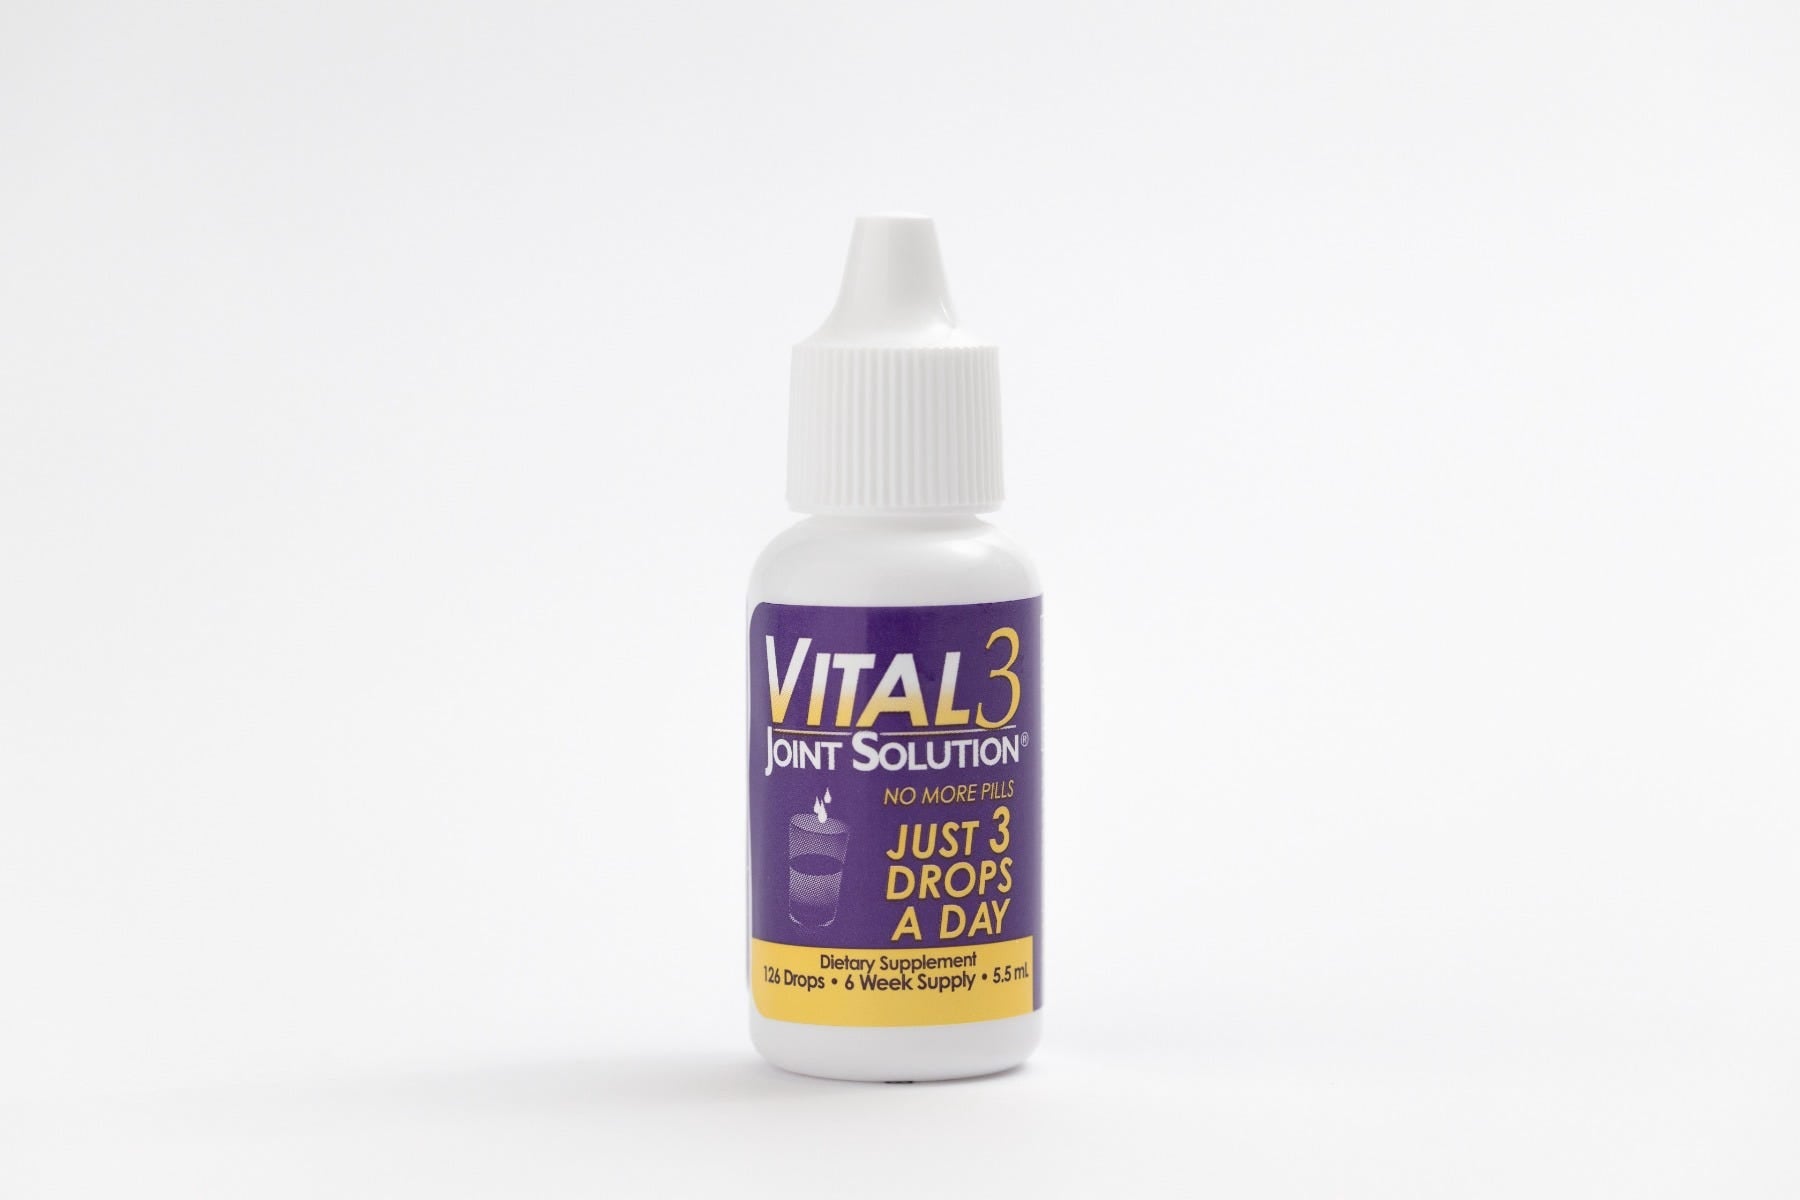 Vital3 Joint Solution® Liquid Clinically Proven - 5.5 mL view 6 of 11